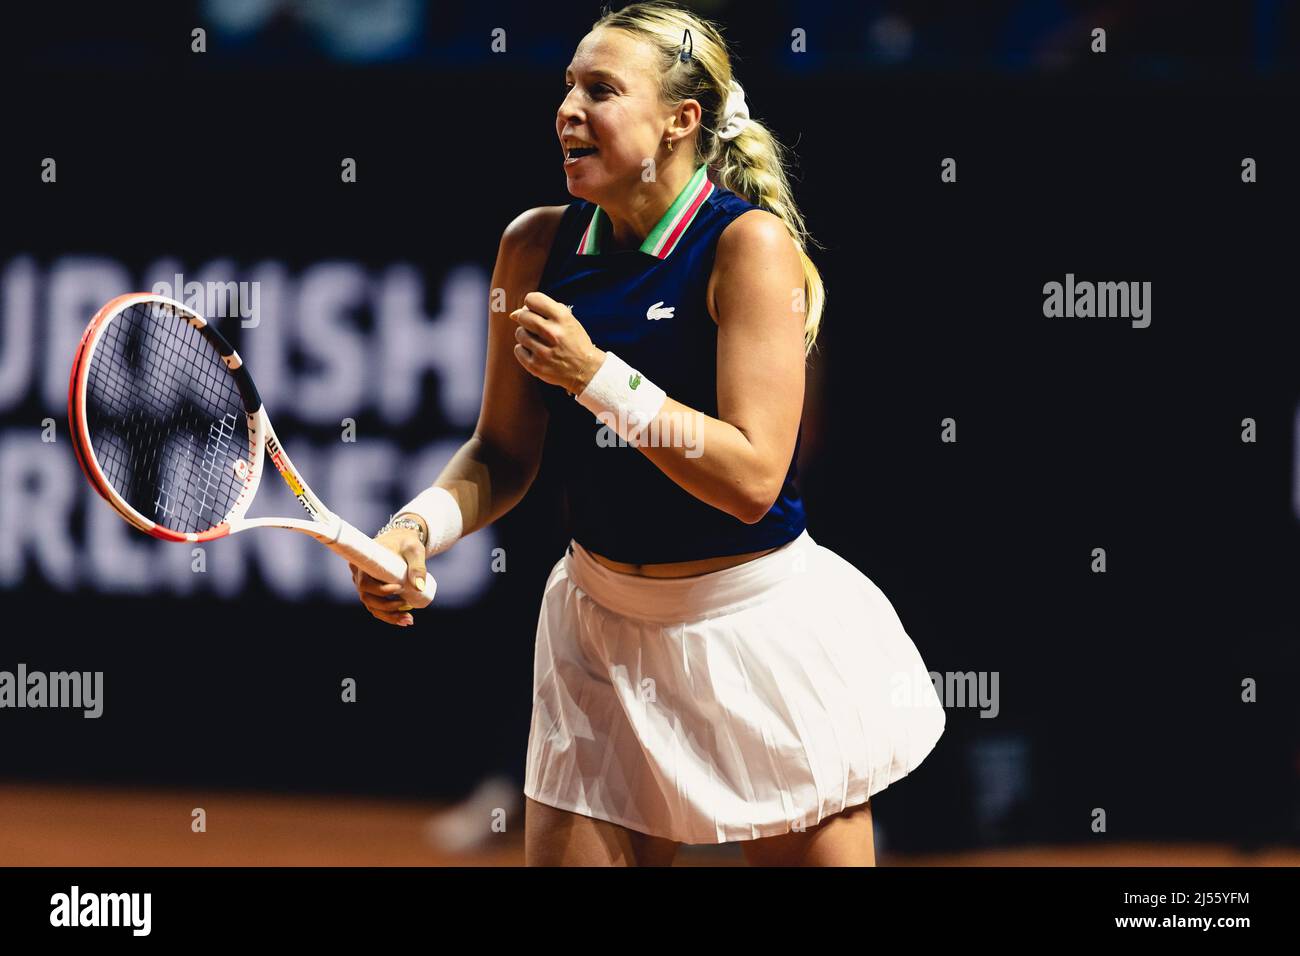 Stuttgart, Germany. 20th Apr, 2022. Anett Kontaveit of Estonia celebrates  match point in her 1st Round Singles match of the 2022 Porsche Tennis Grand  Prix against Angelique Kerber of Germany at the